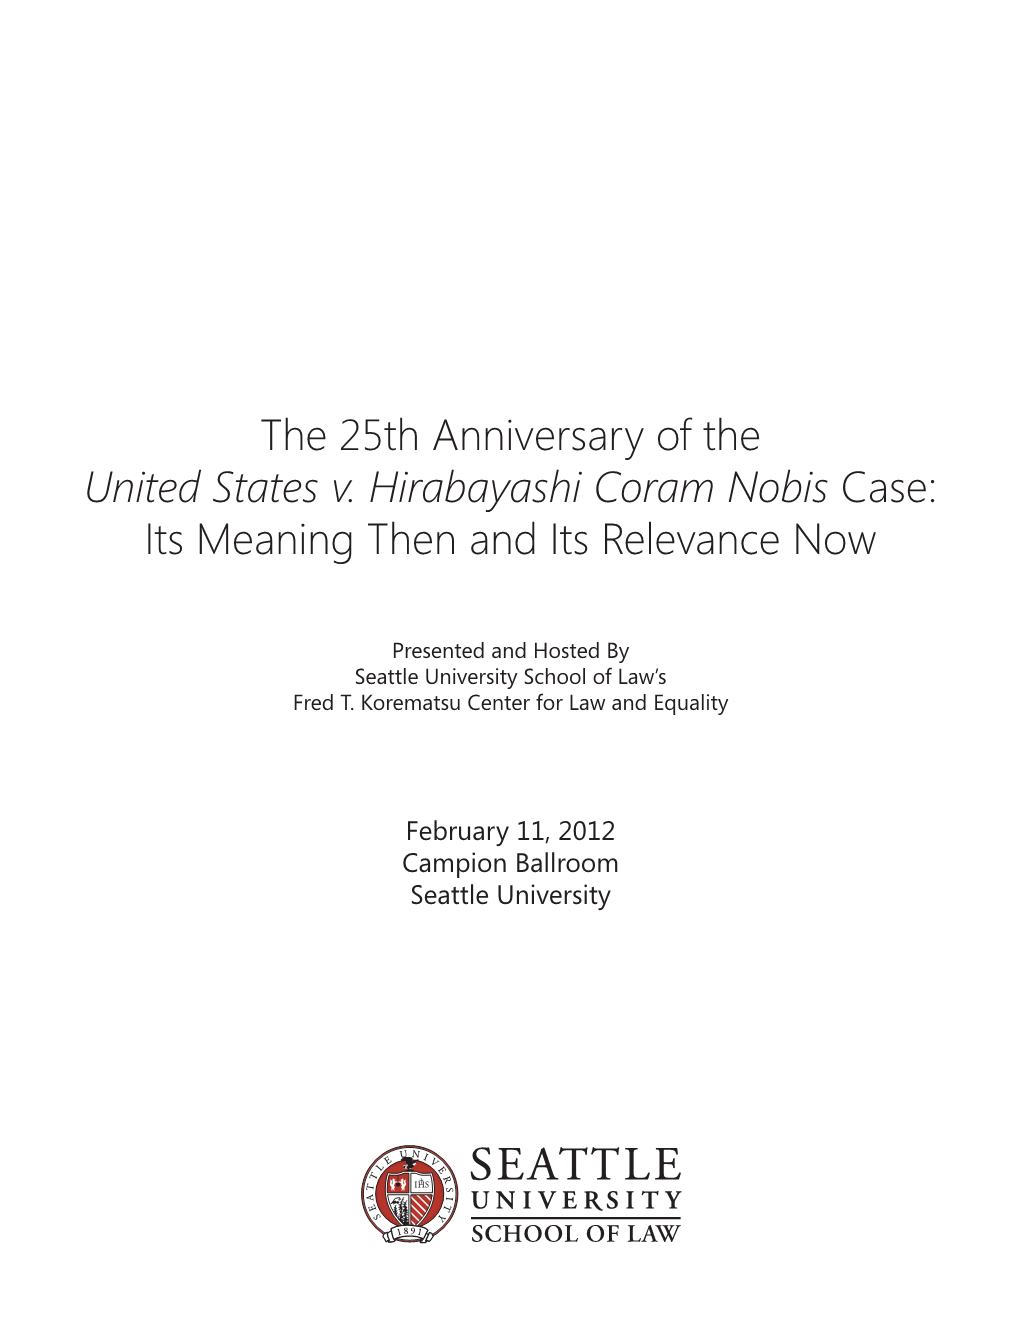 The 25Th Anniversary of the United States V